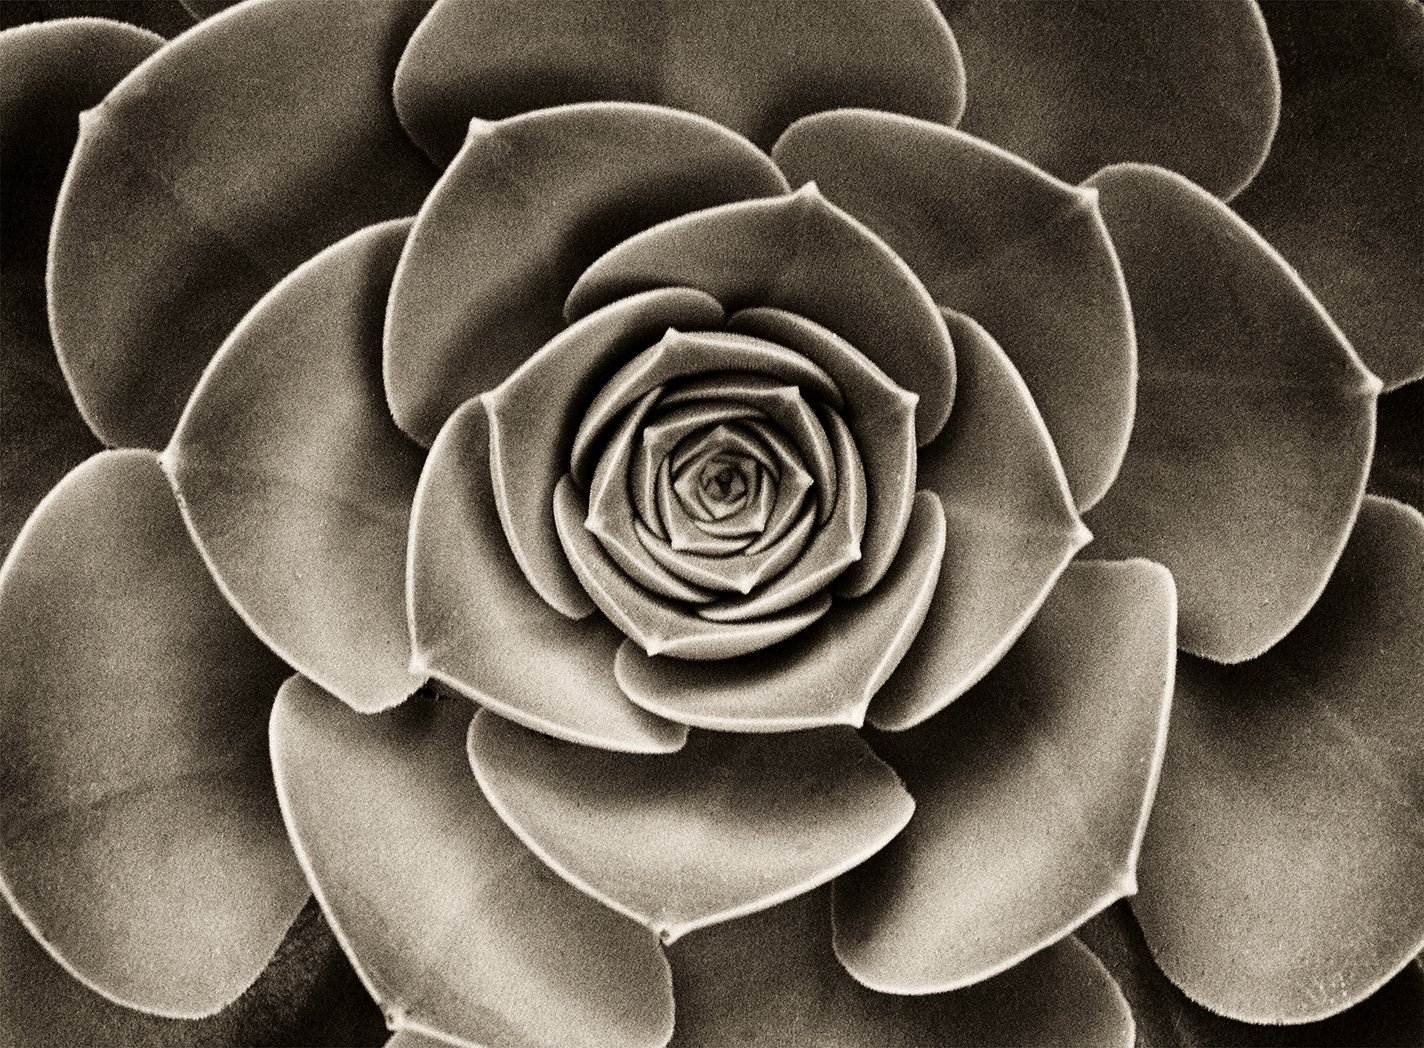  Michael Haber   Succulent,  2004  100% Archival fine art print    Small: 30 x 40 in. Editions of 20, 25 and 30  Medium: 40 x 60 in. Editions of 20 and 25  Large: 50 X 70 in. Editions of 15 and 20  Extra Large: 50 X 96 in Editions of 10 